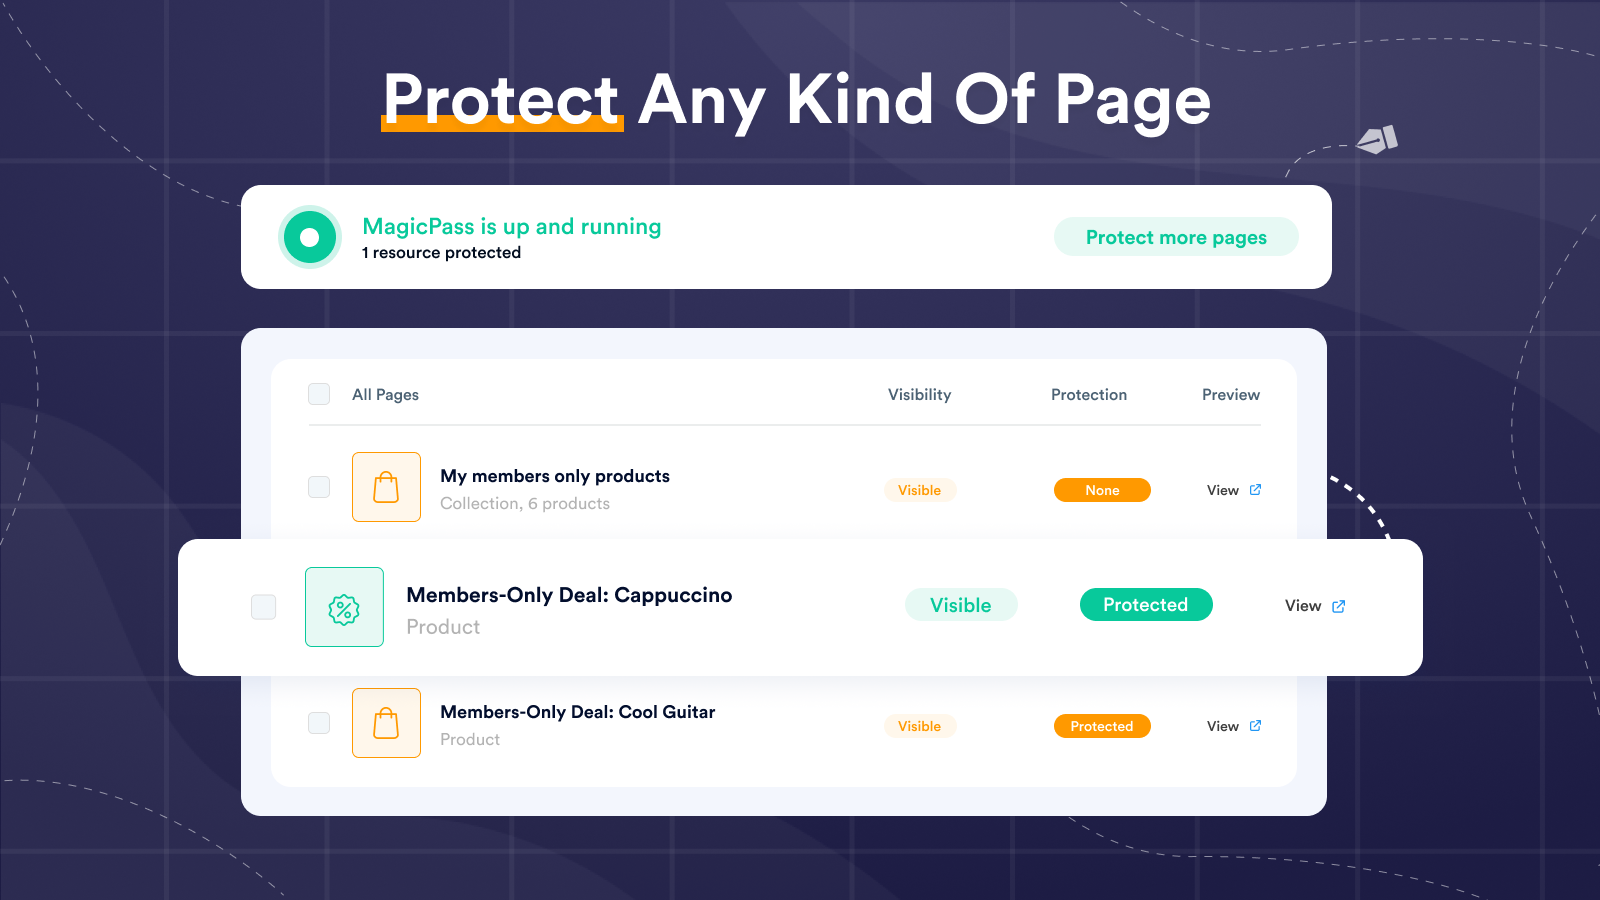 Protect any kind of page